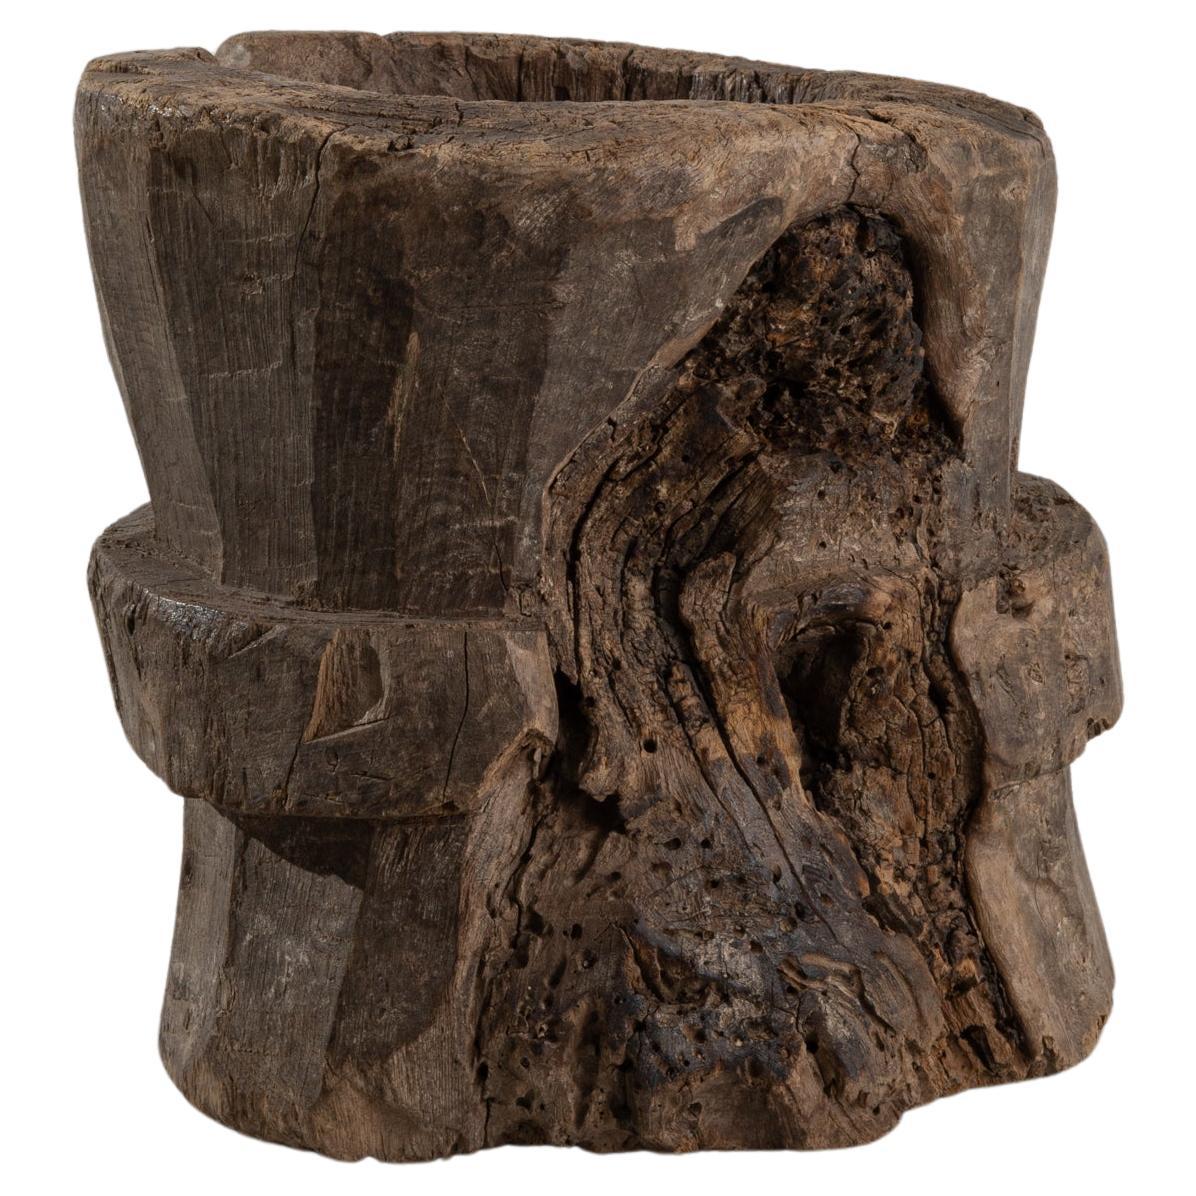 19th Century European Wooden Mortar For Sale